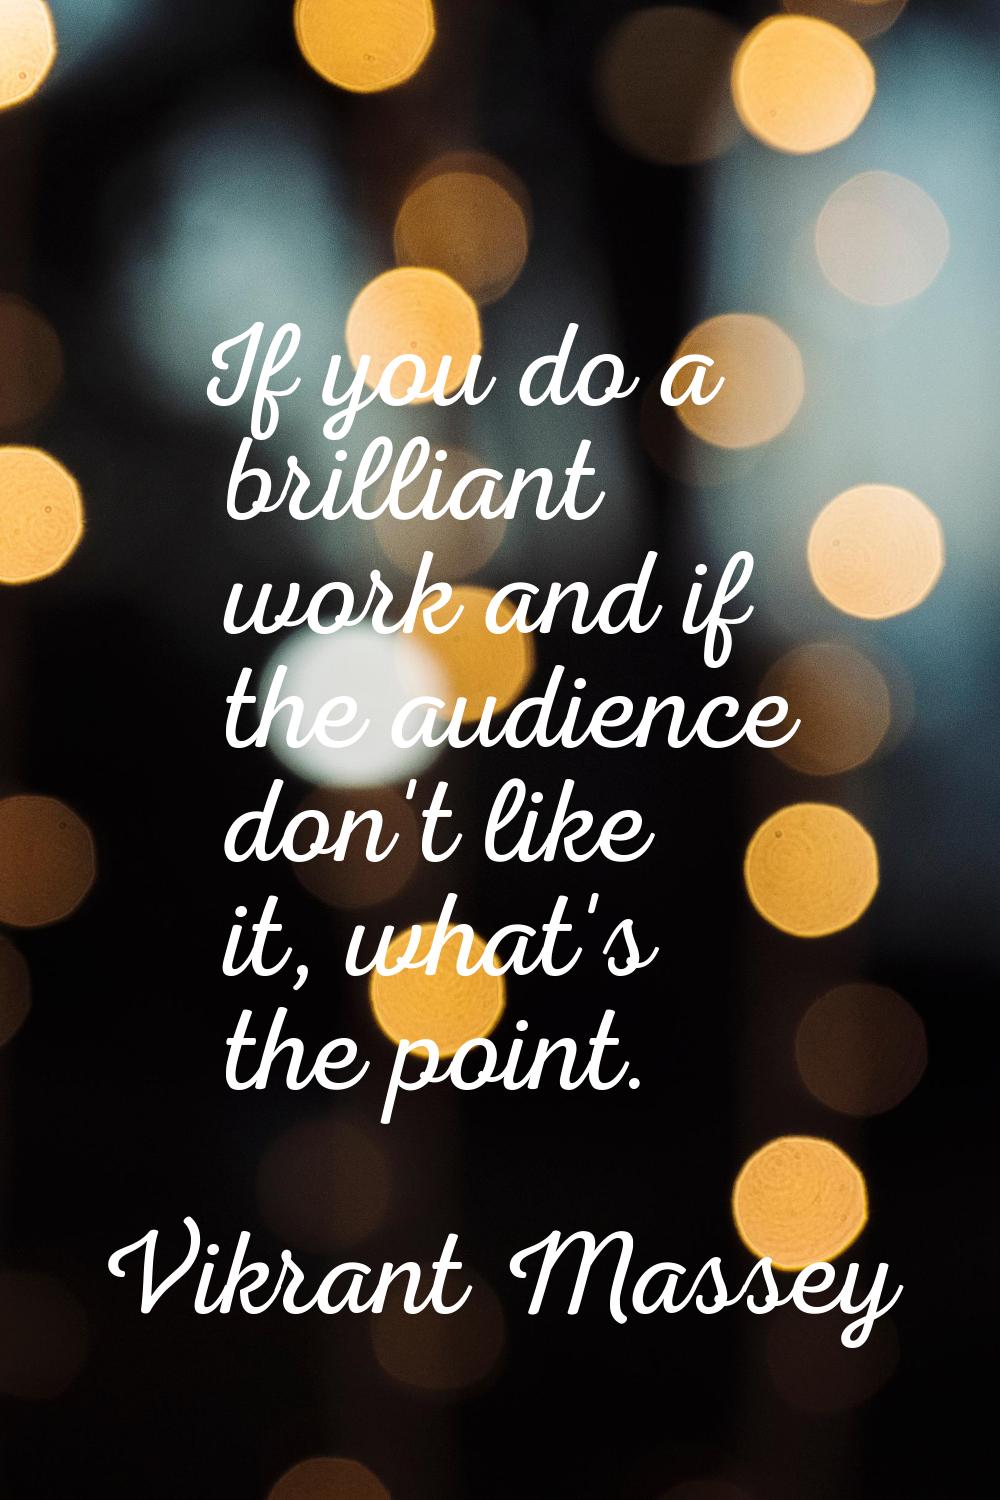 If you do a brilliant work and if the audience don't like it, what's the point.